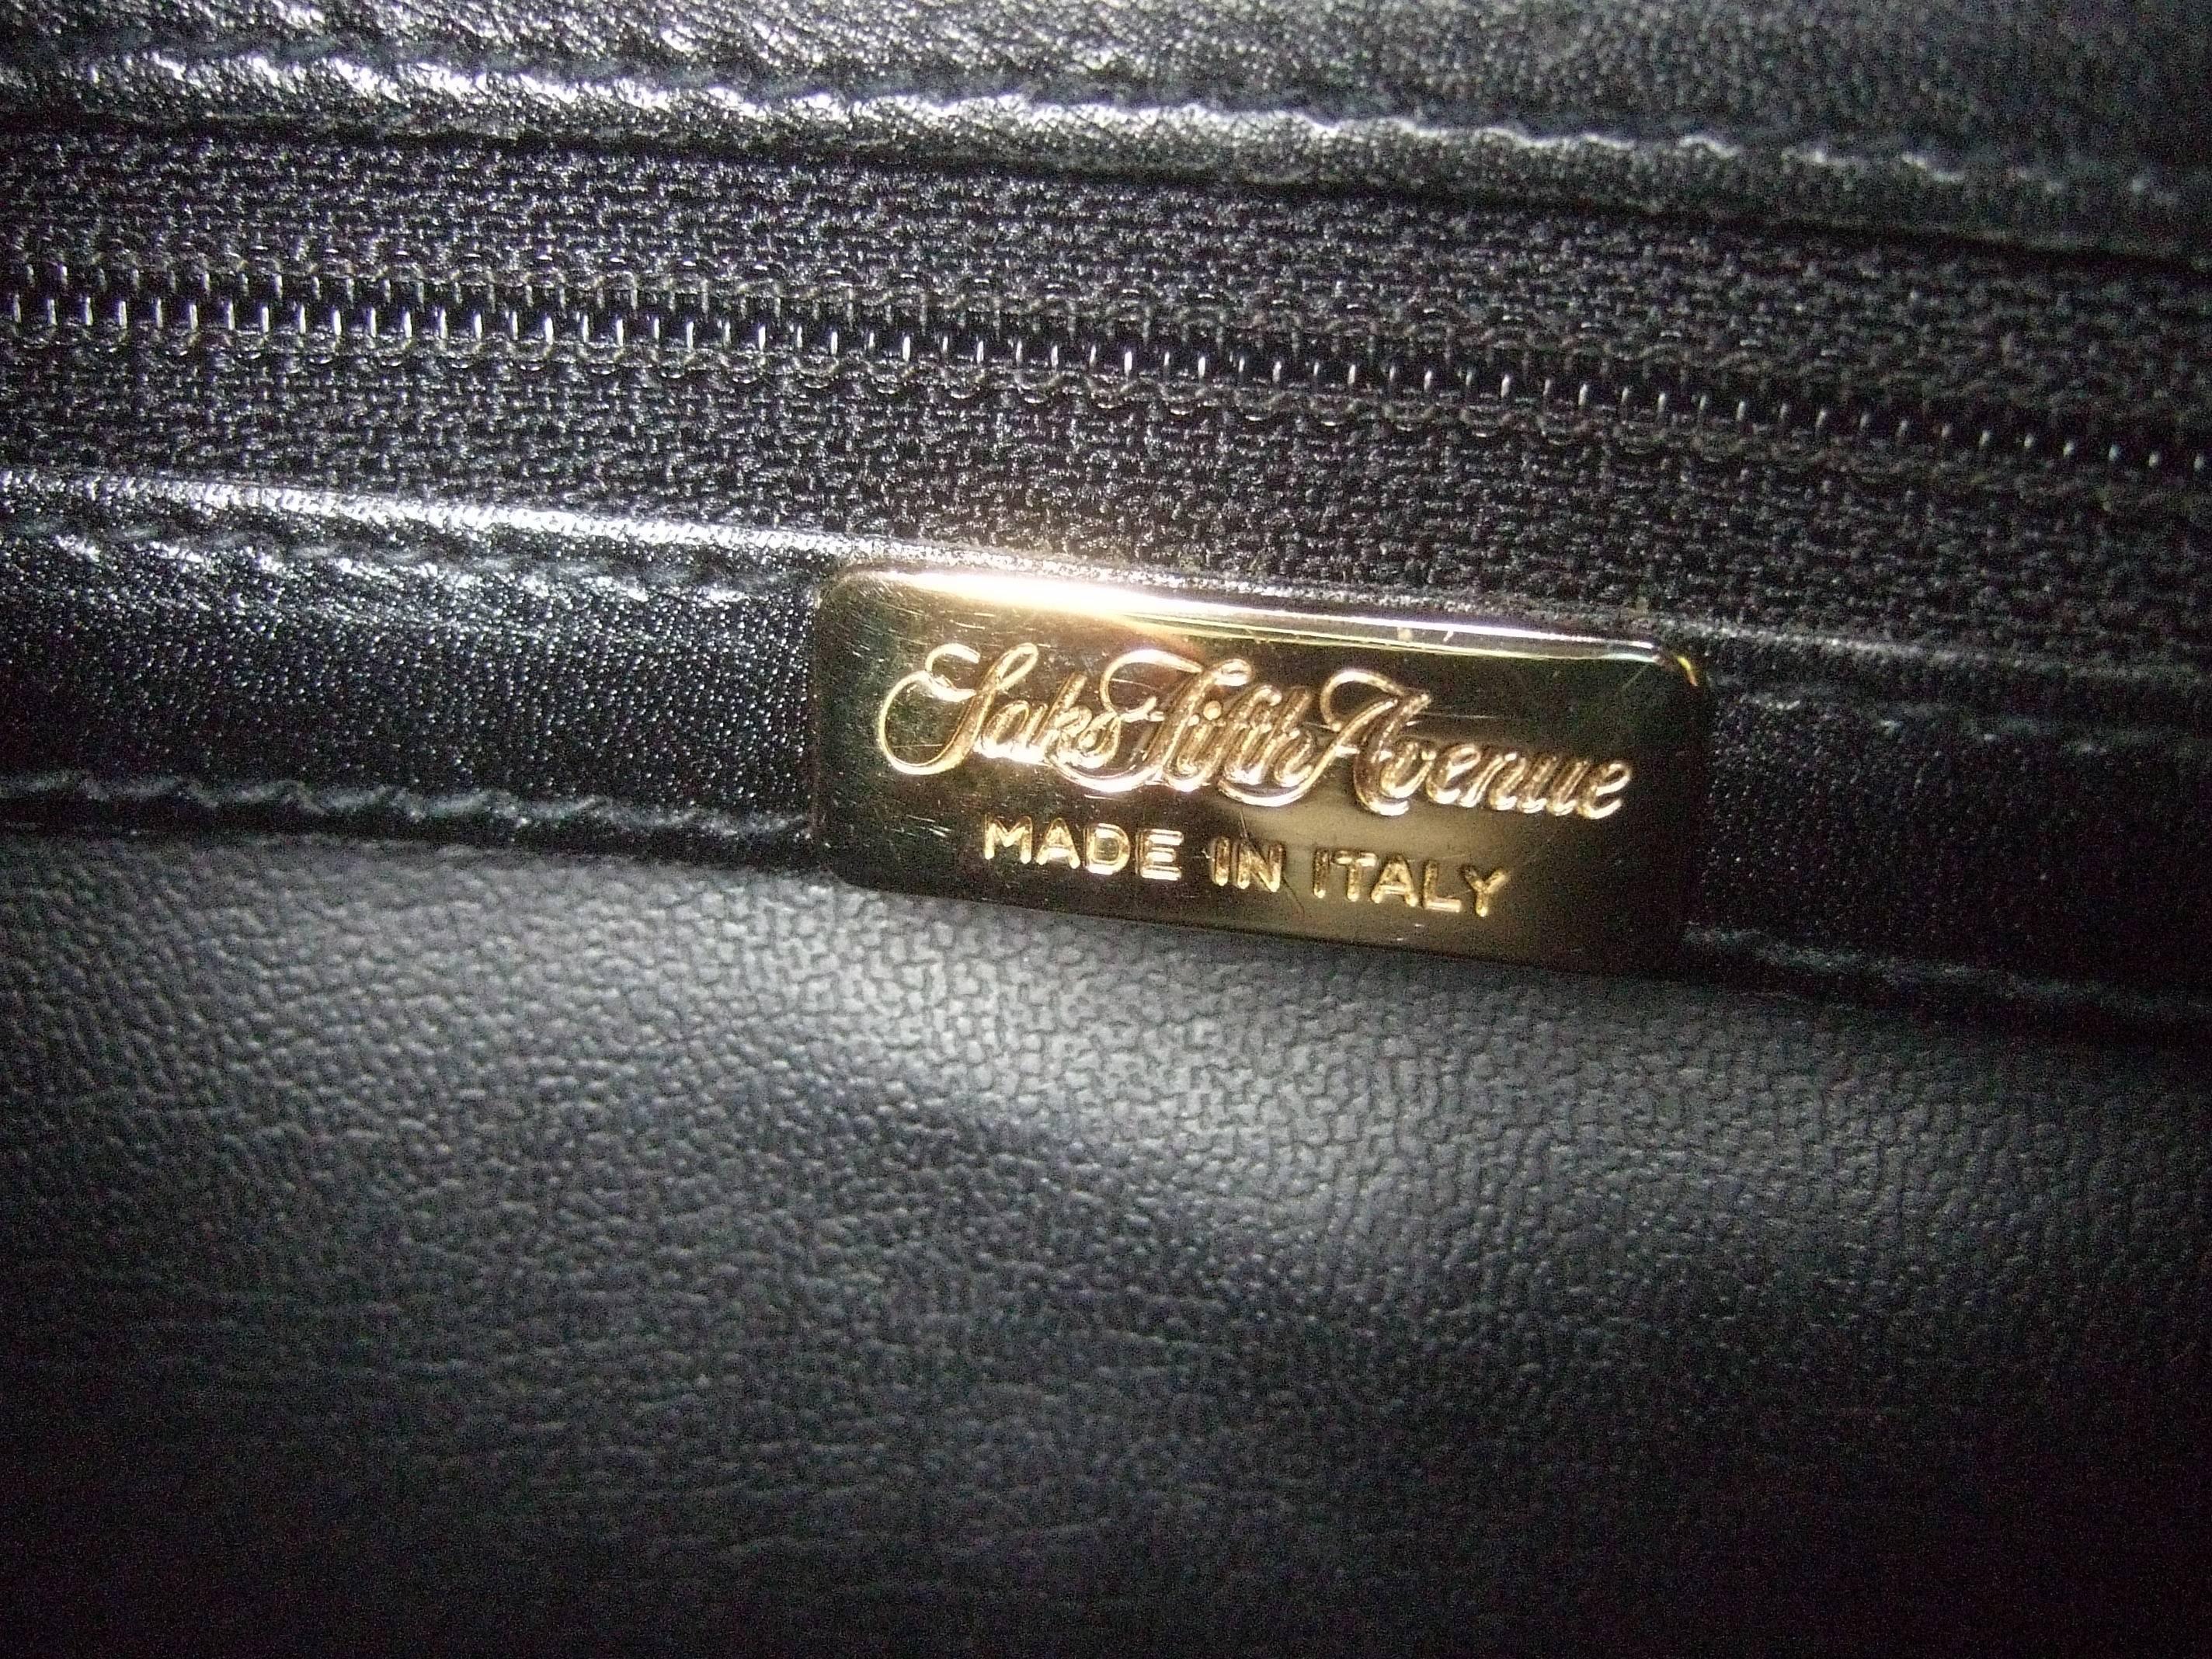 Saks Fifth Avenue Ebony Leather Handbag Made in Italy  In Good Condition For Sale In University City, MO